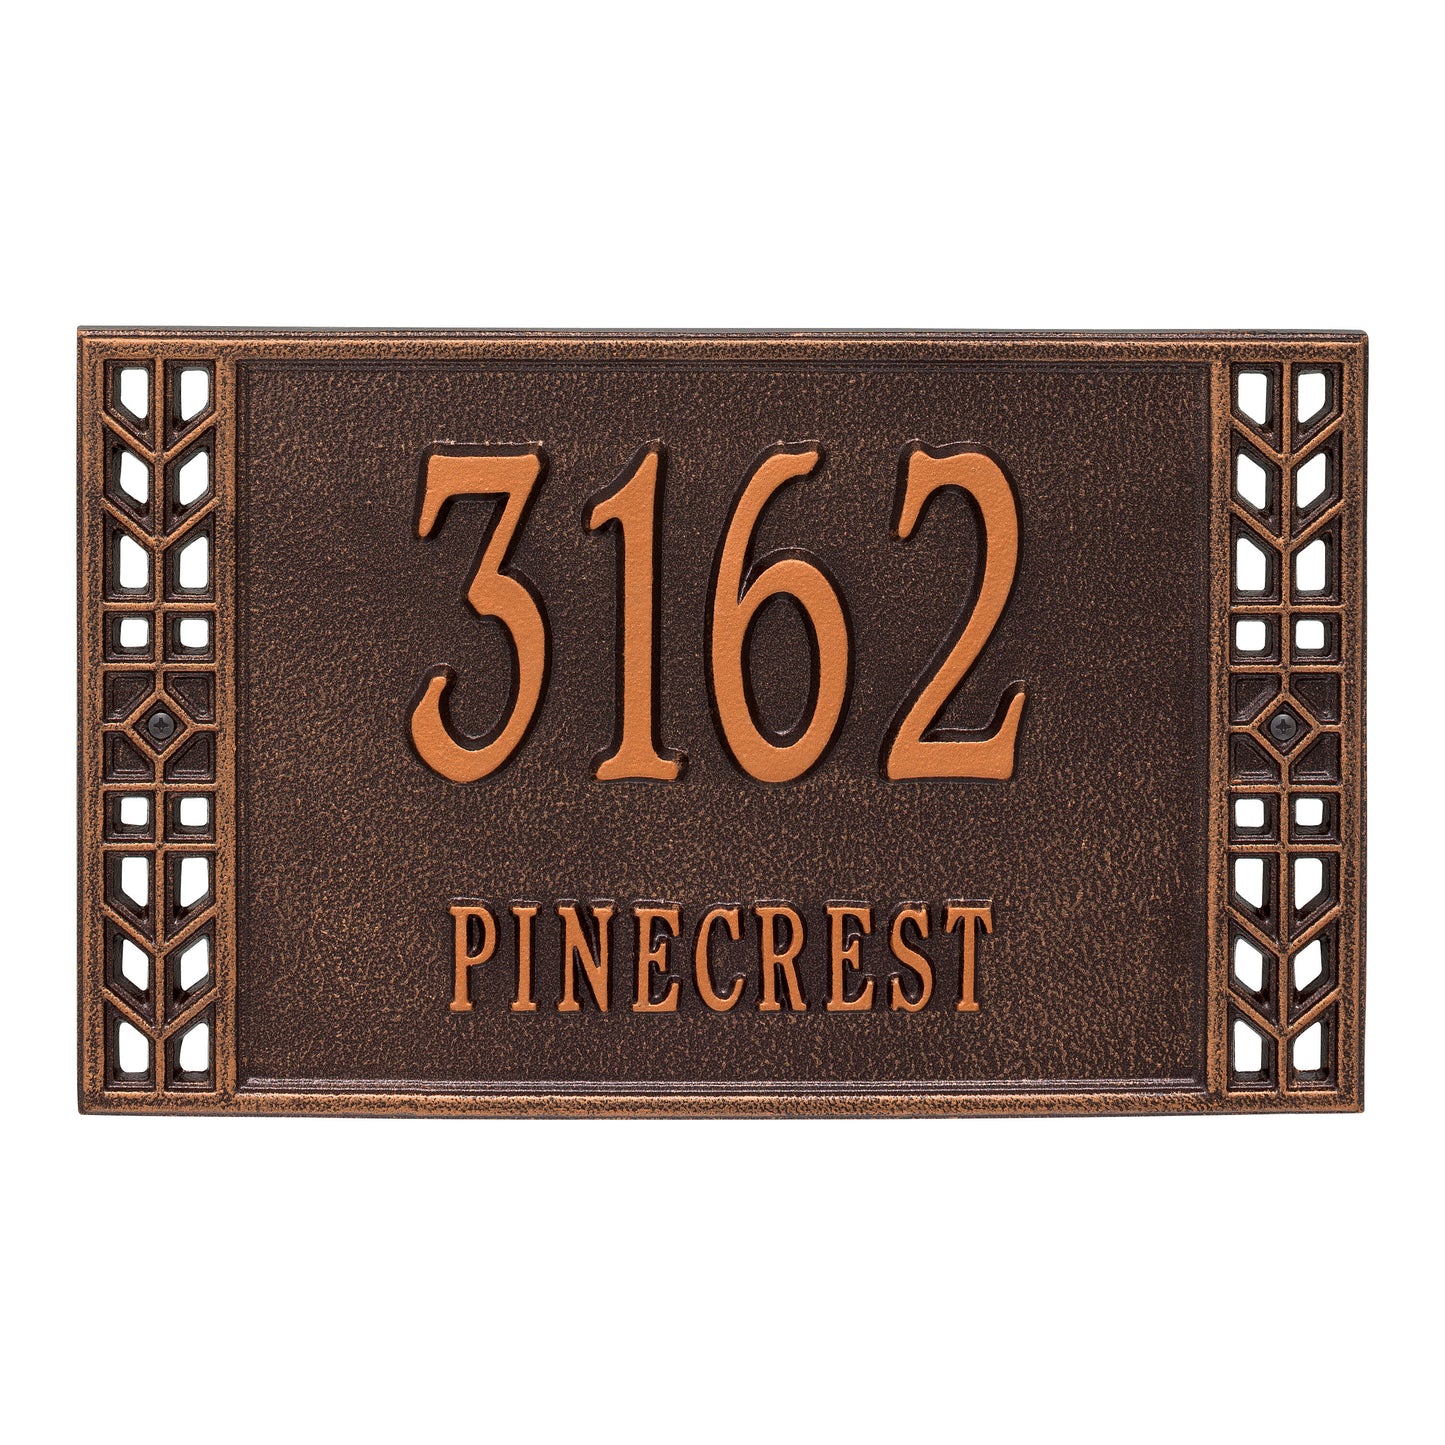 Whitehall Products Personalized Boston Standard Wall Plaque Two Line Antique Copper